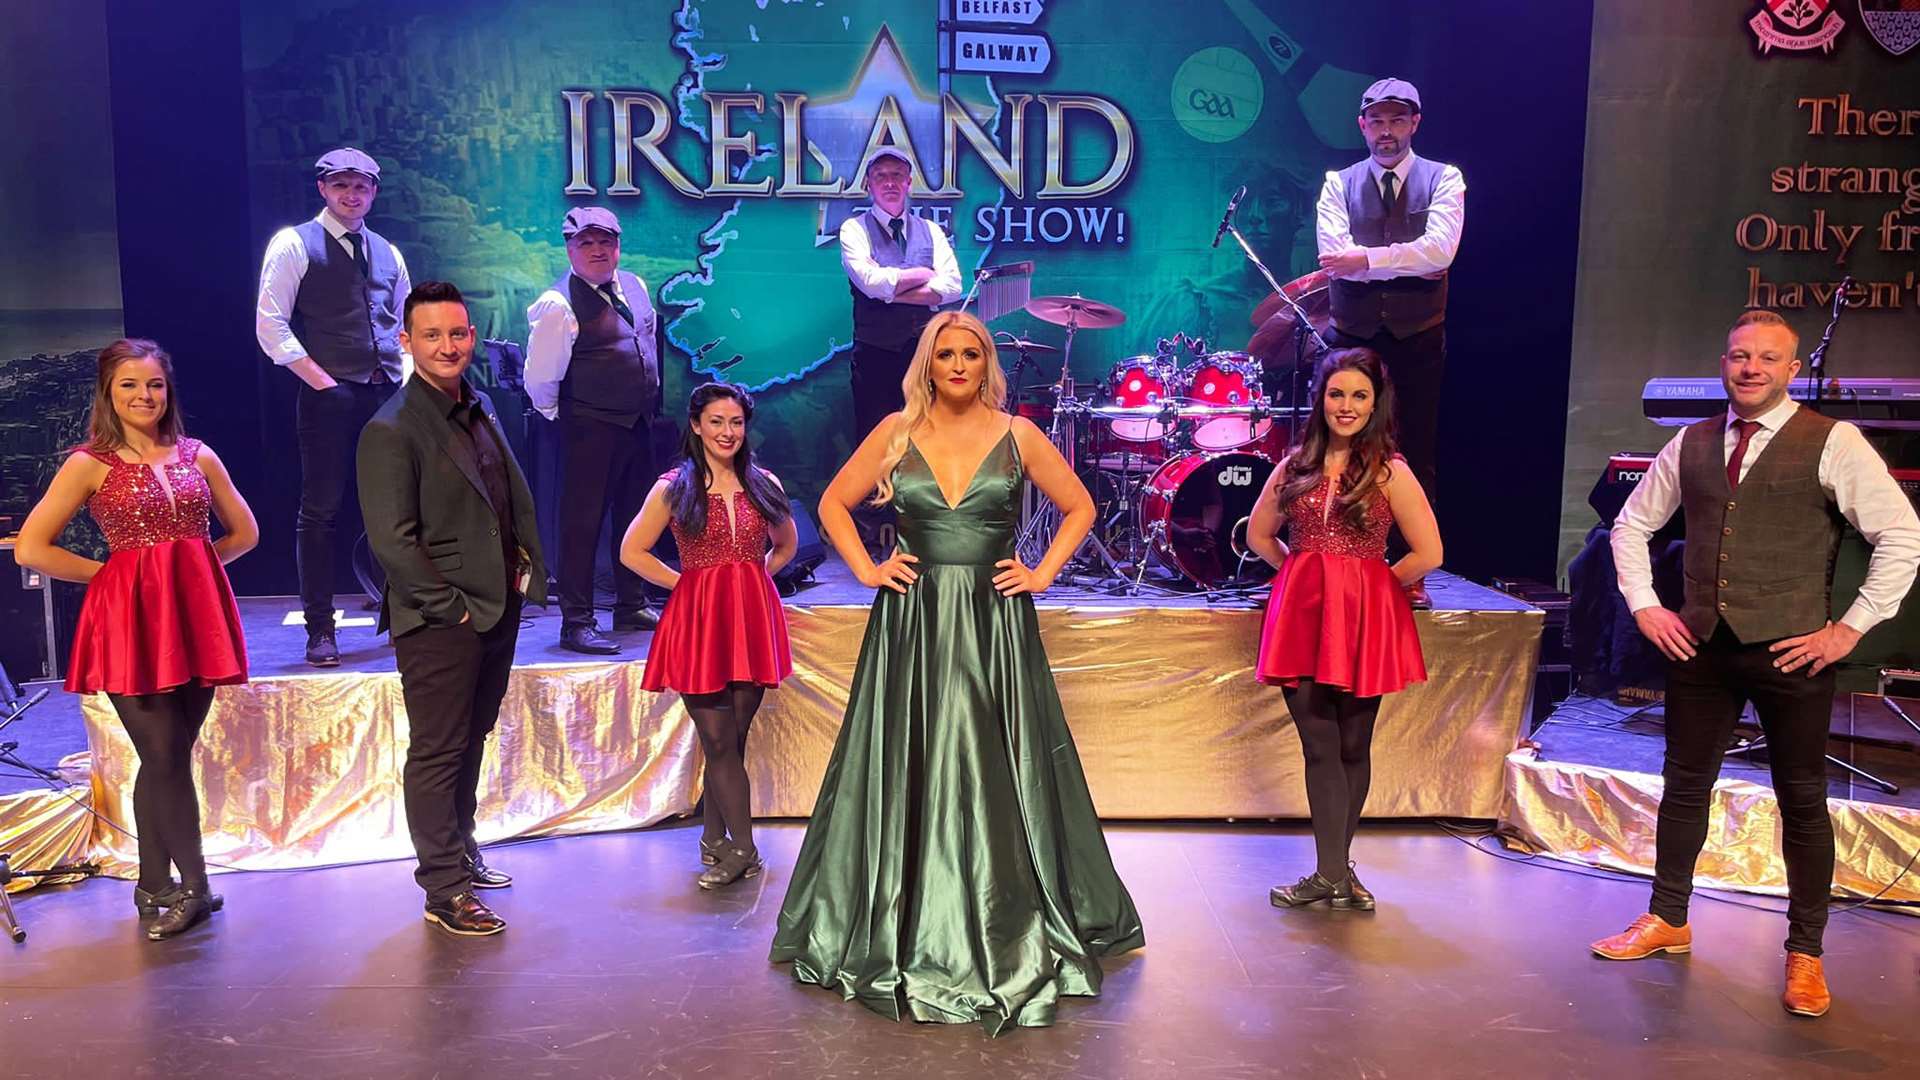 Ireland the Show features some of Ireland's most talented performers.